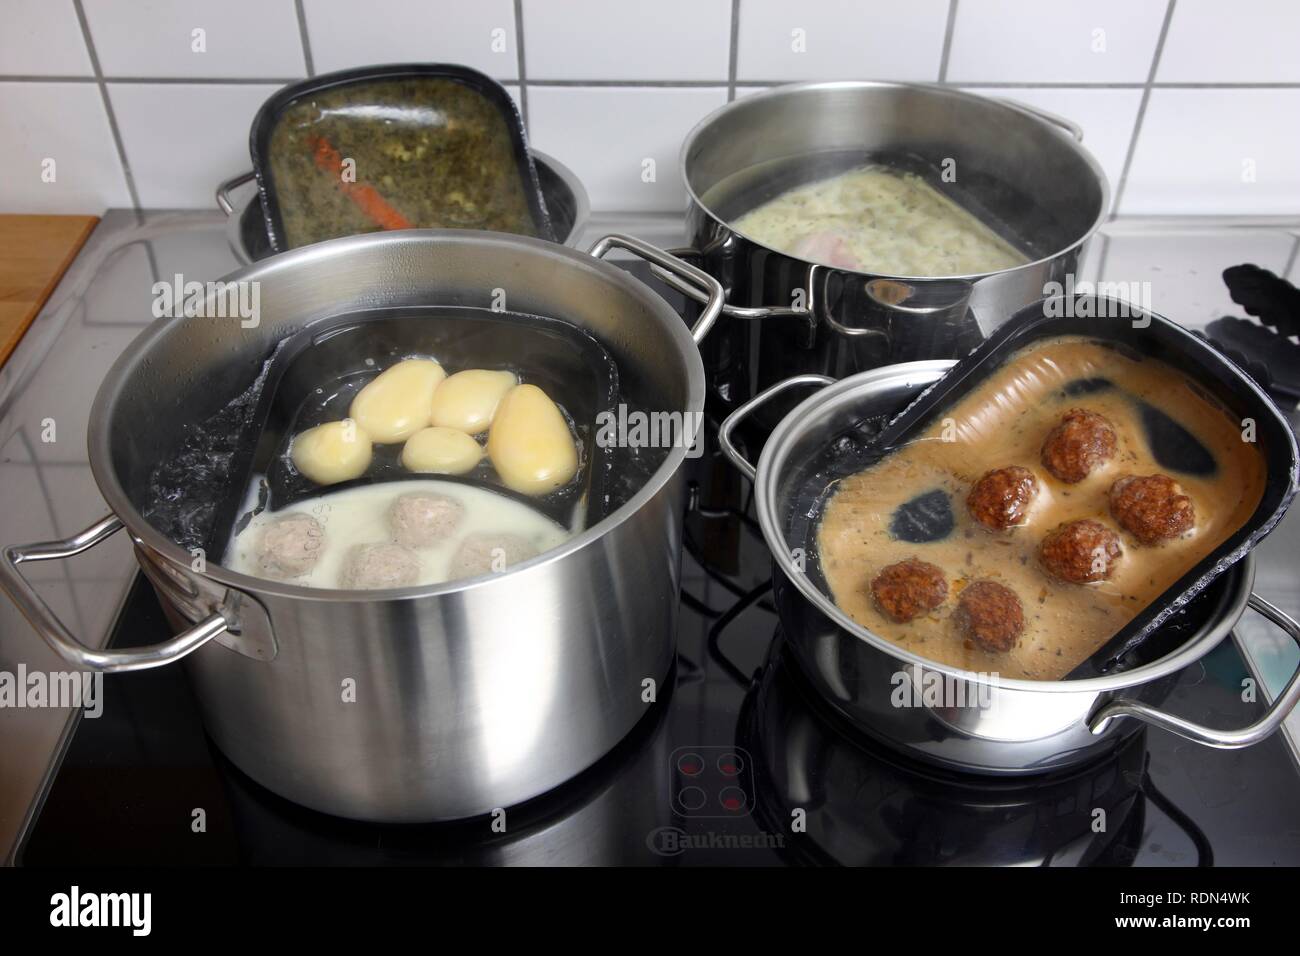 Heating prepared meals in a water bath Stock Photo